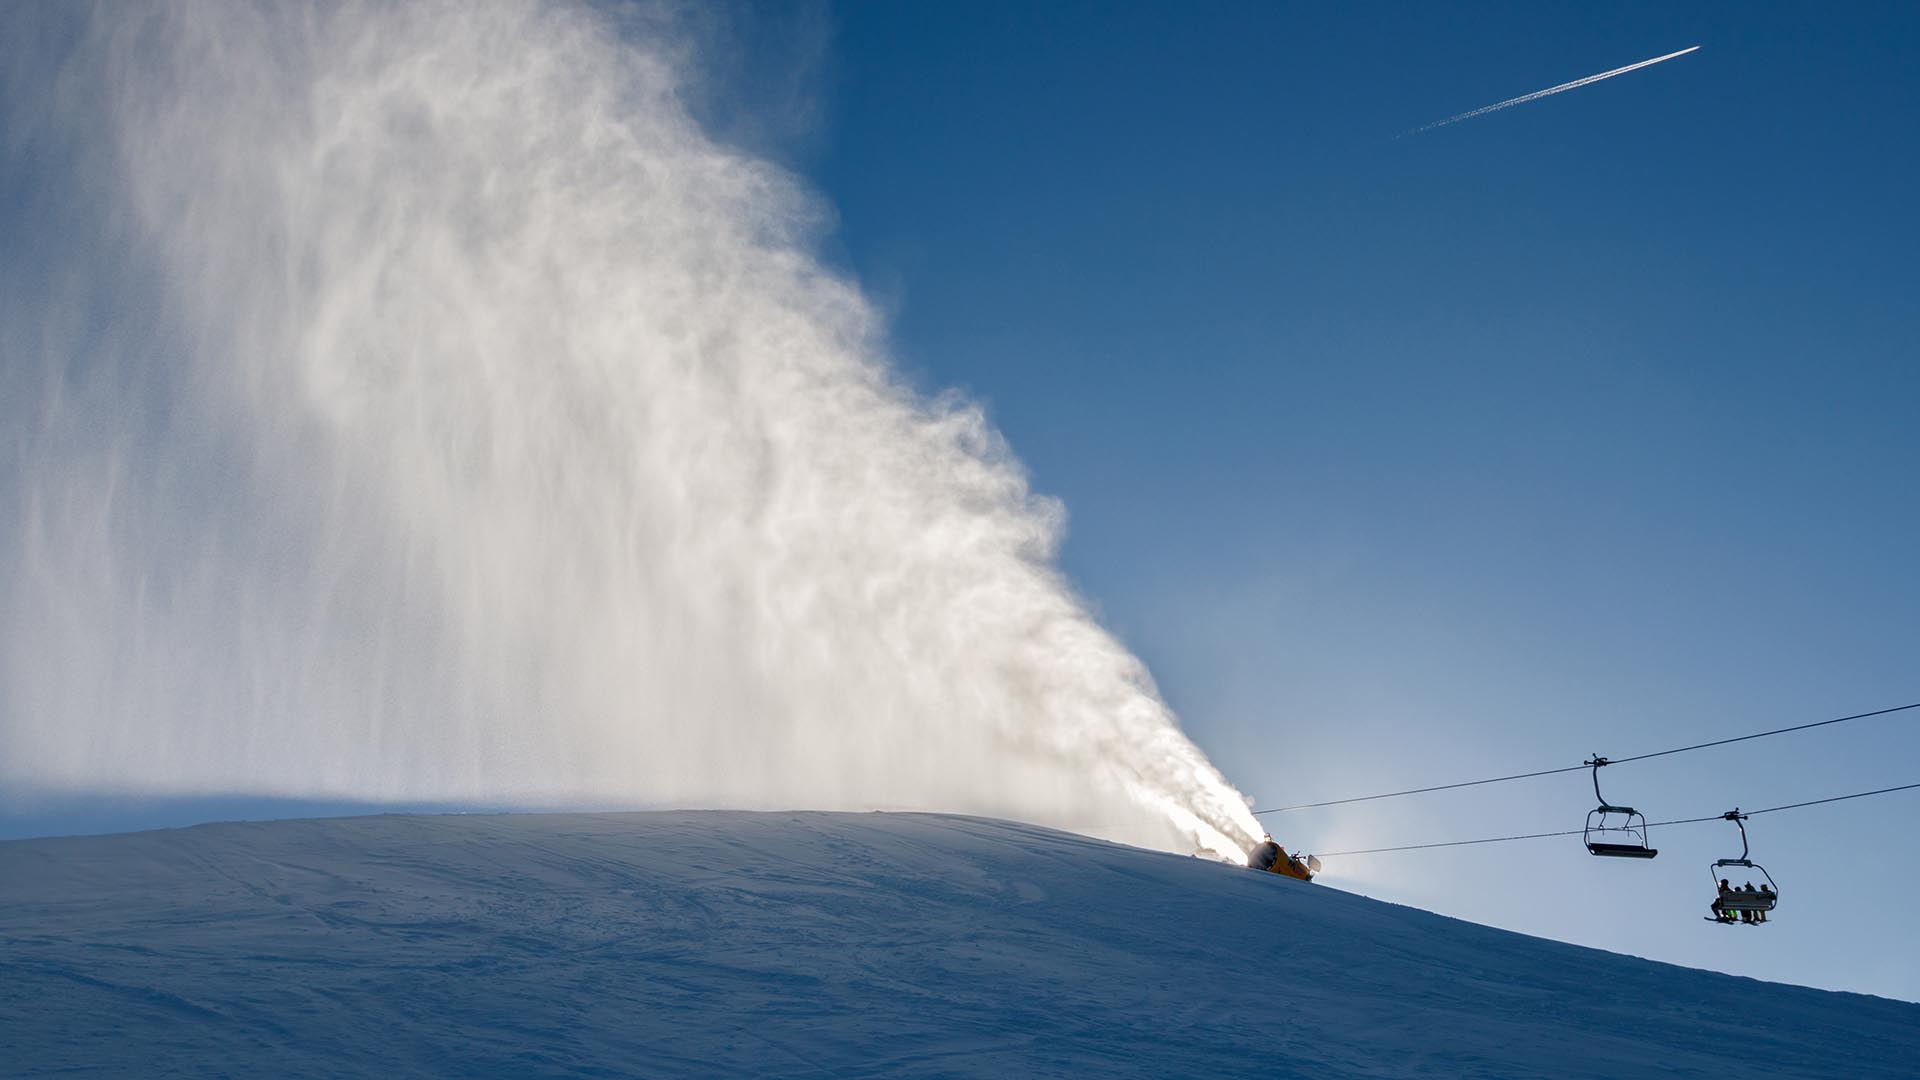 Snow cannon and chairlift at ski resort